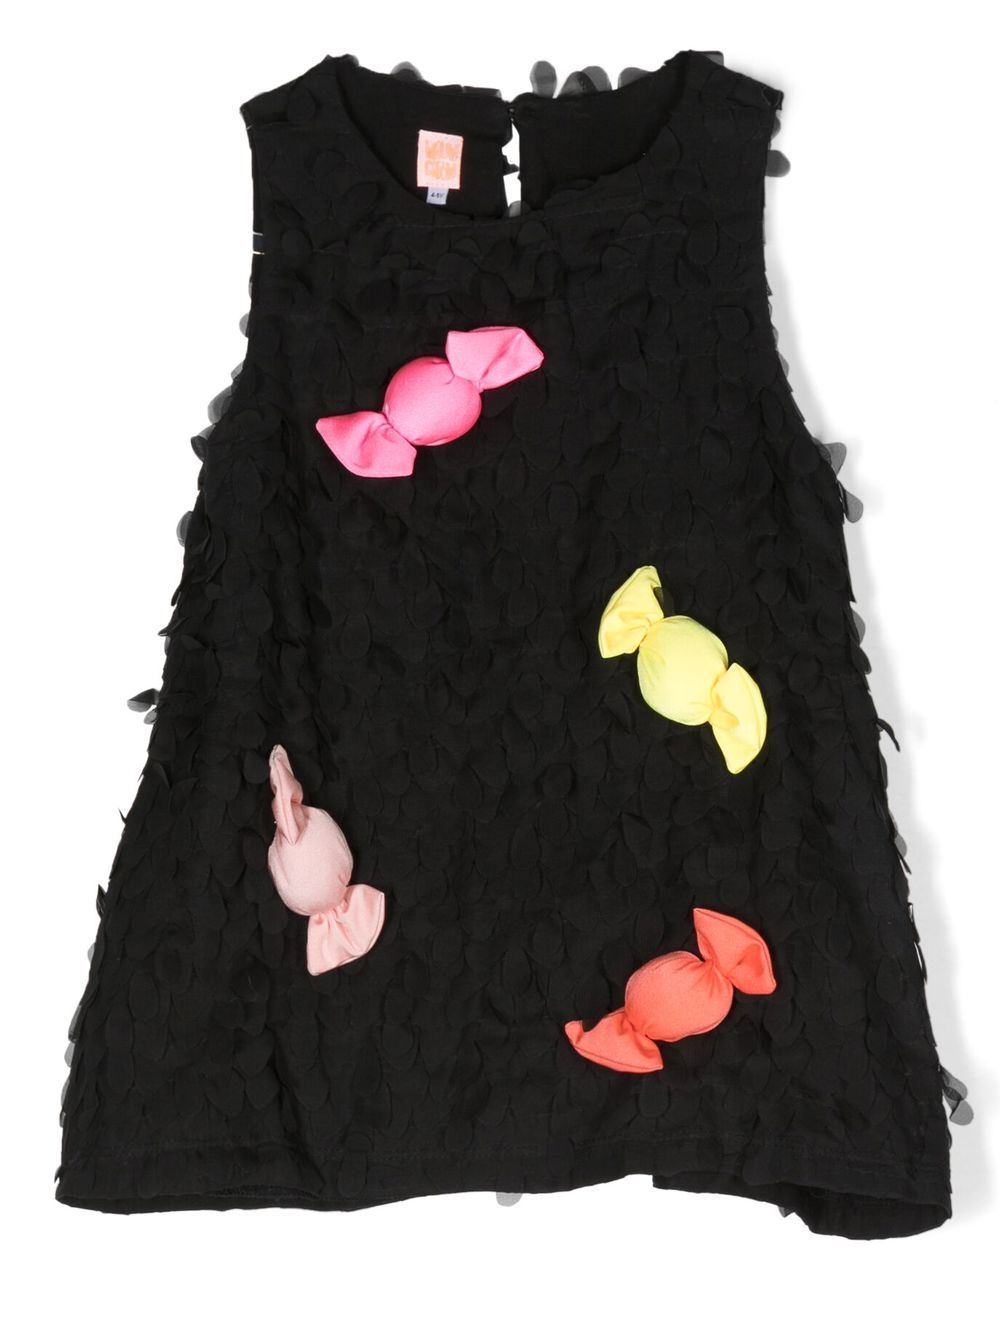 WAUW CAPOW by BANGBANG Simone candy dress - Black von WAUW CAPOW by BANGBANG